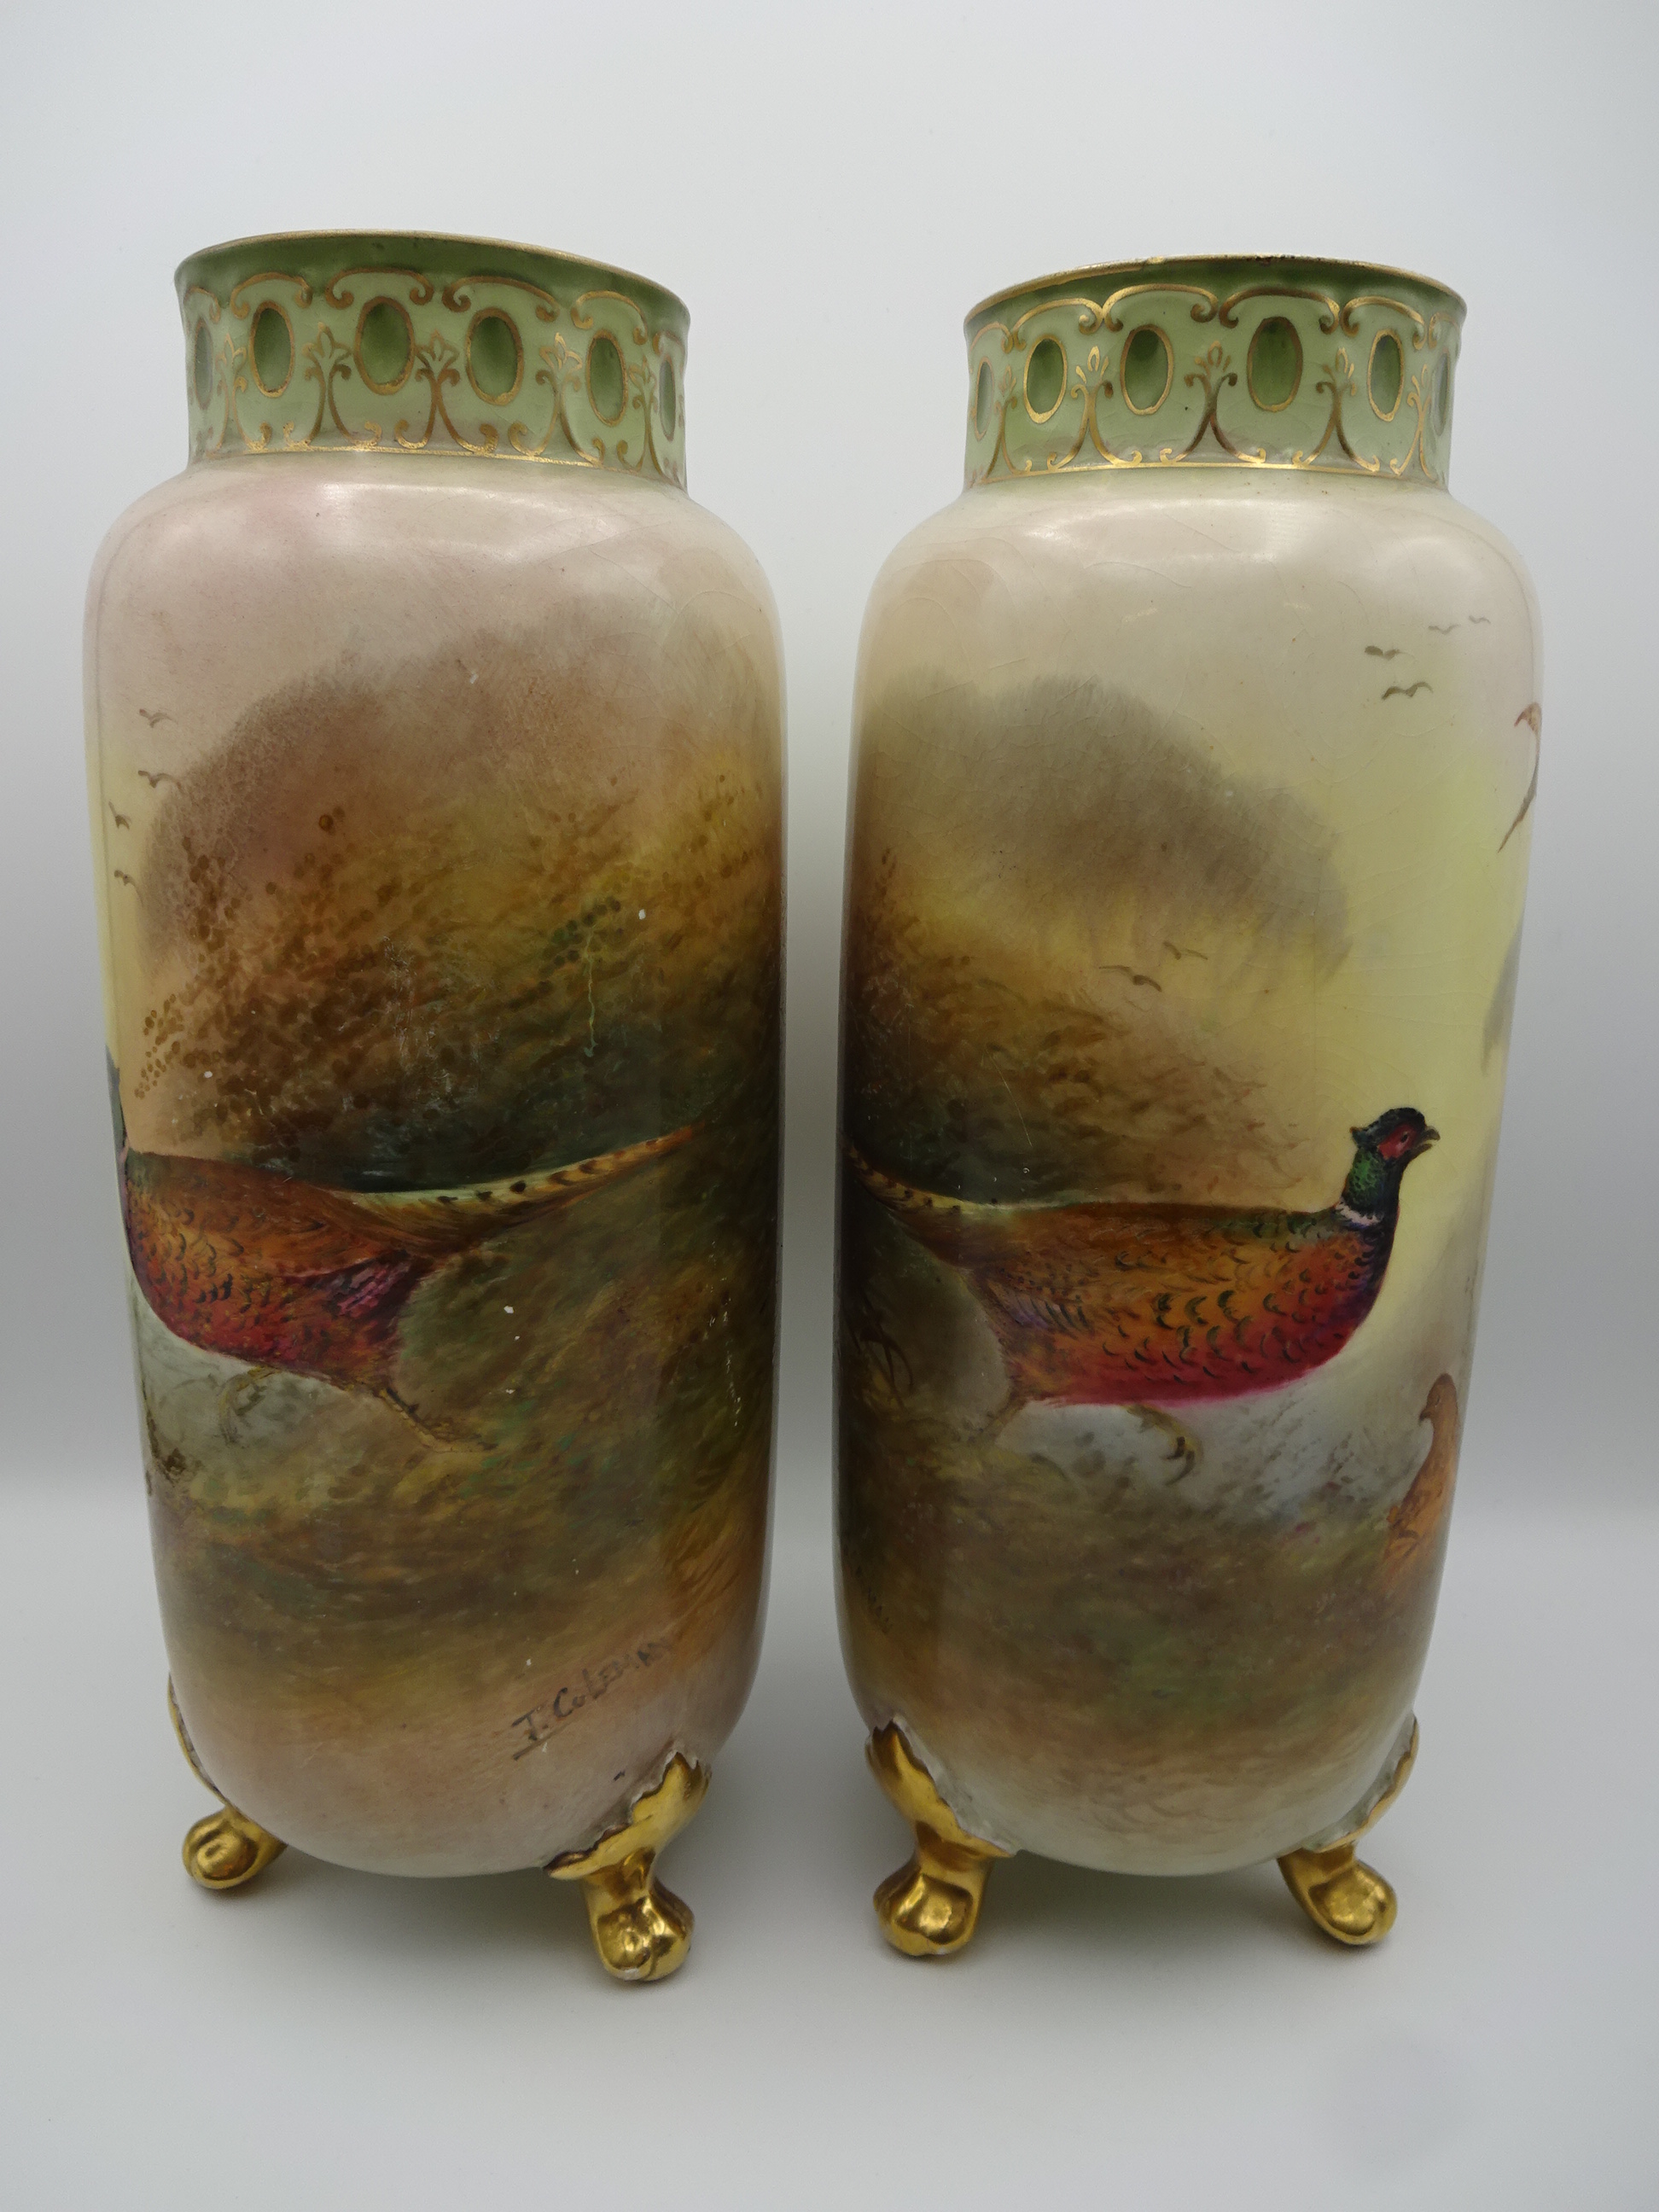 PAIR OF CROWN DEVON FIELDINGS PHEASANT THEMED VASES SIGNED COLEMAN 0865 17 26CM TALL